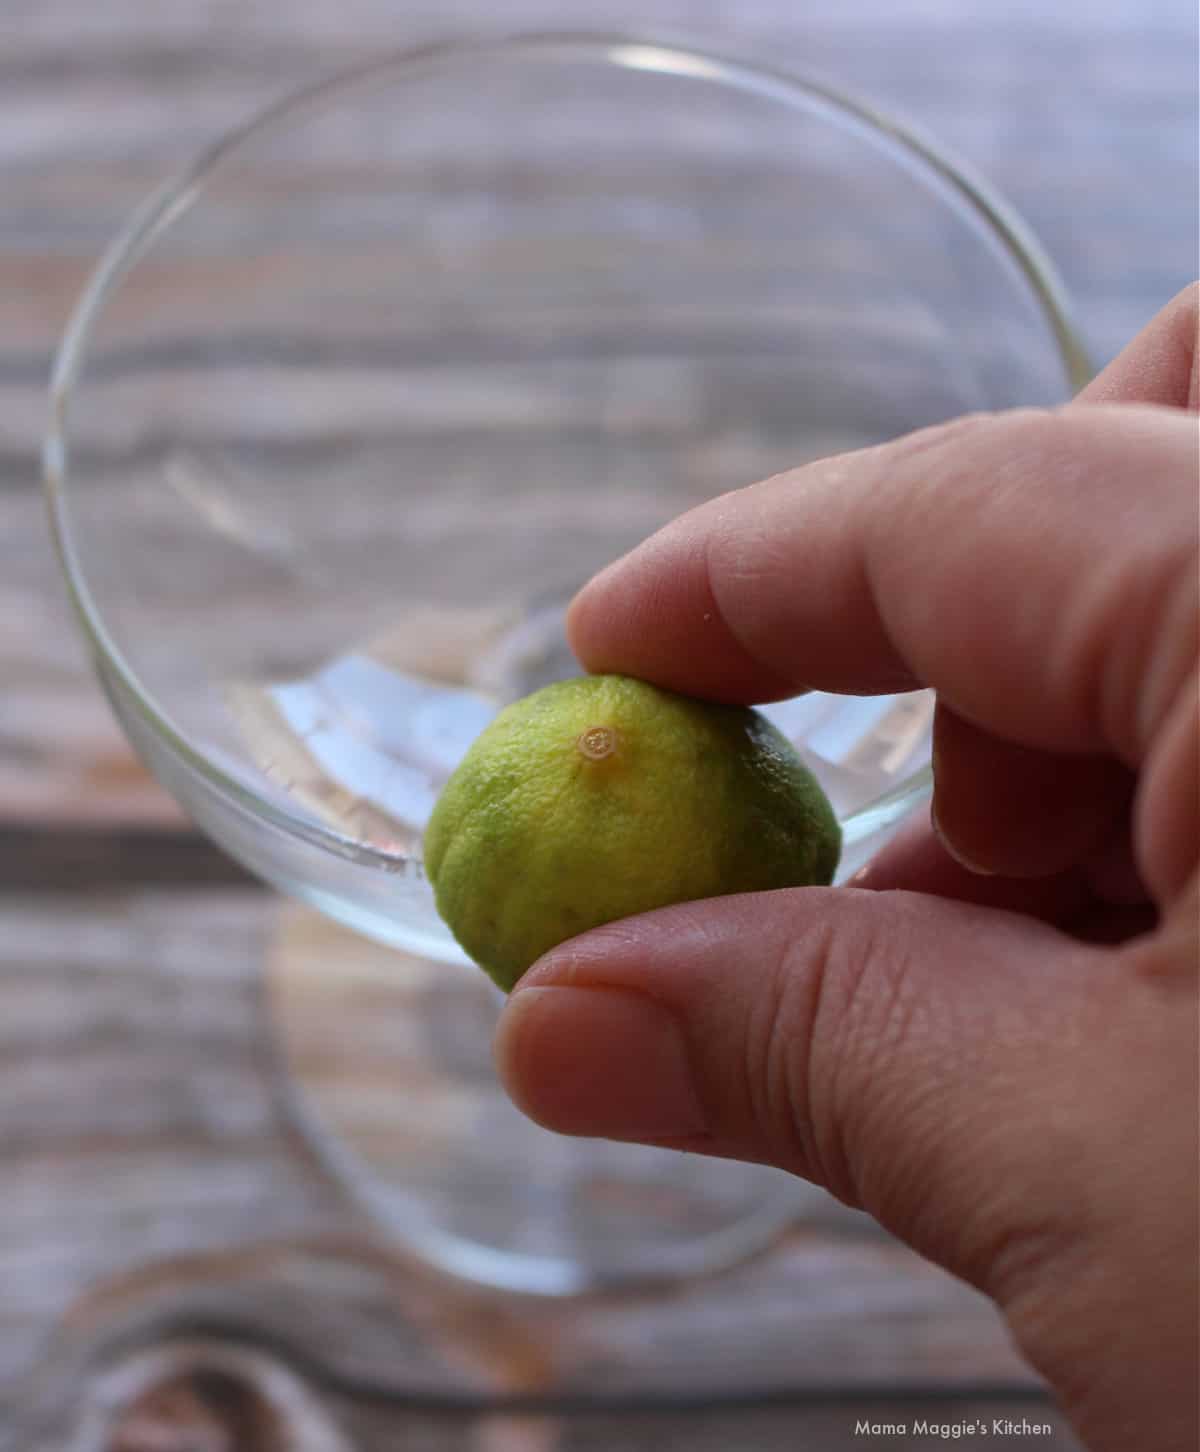 A hand holding a cut lime and rubbing it over the edge of a glass rim.